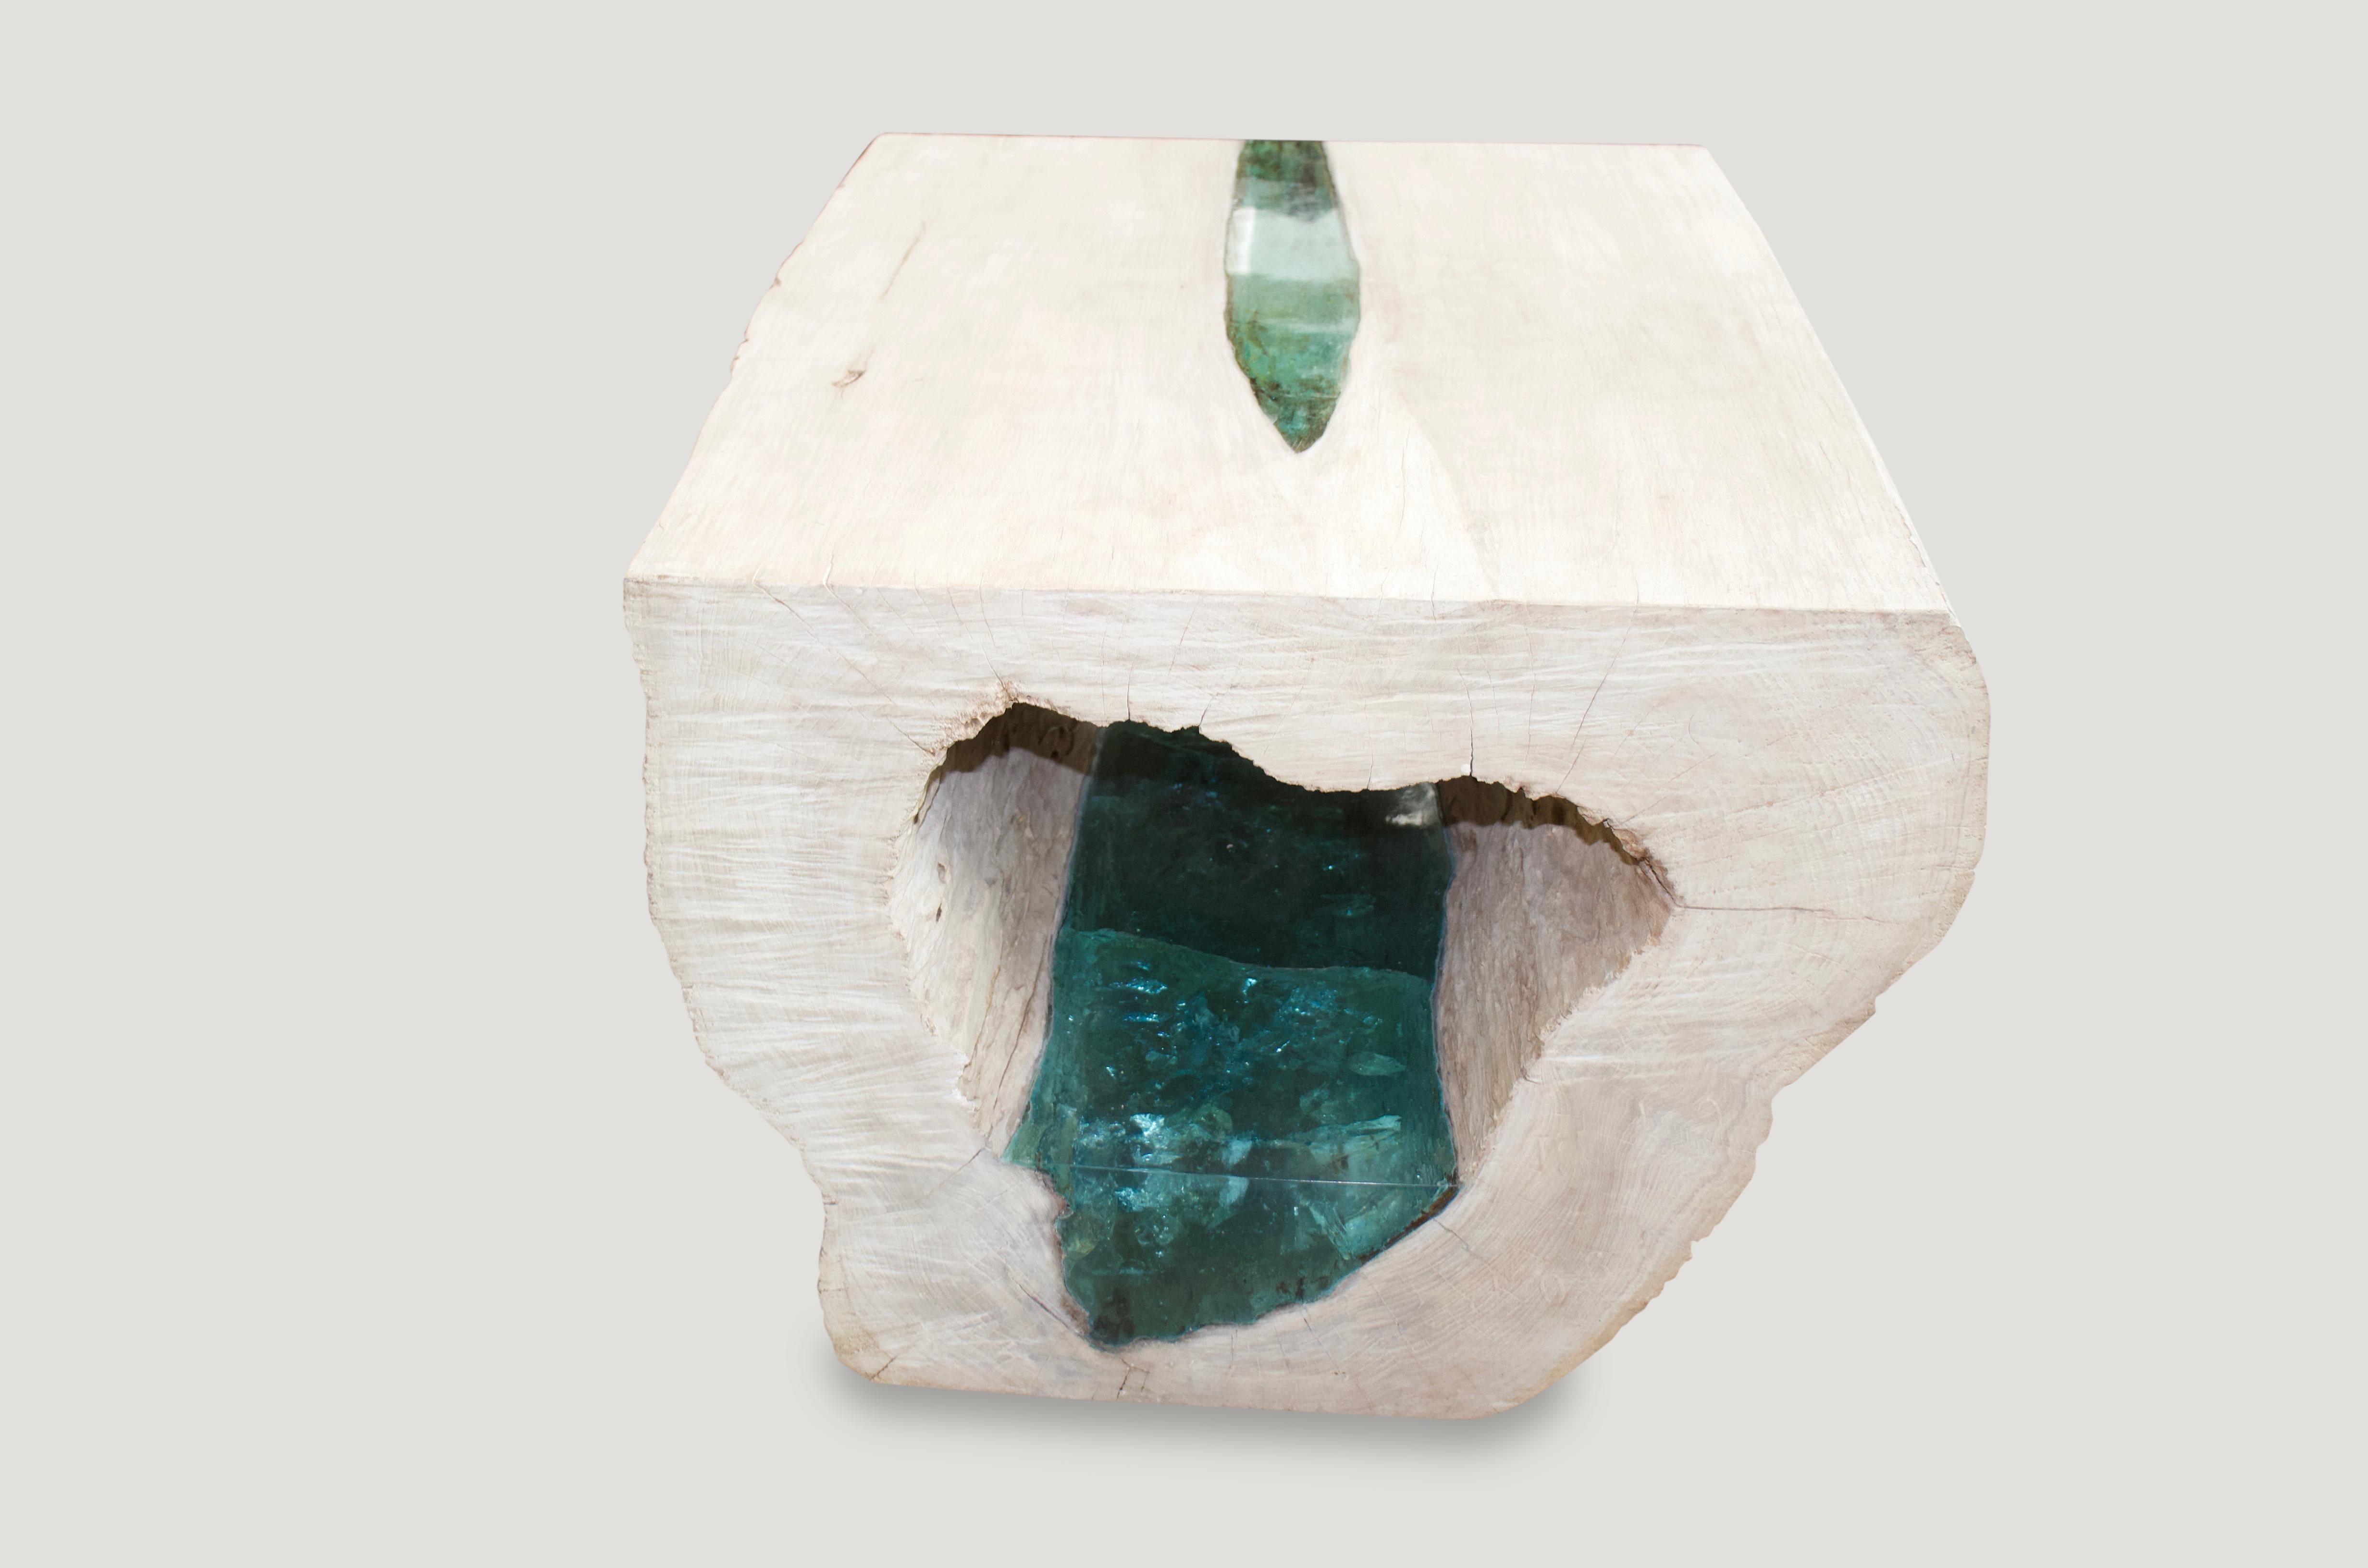 Reclaimed bleached teak wood hollowed out log. We turned this into a coffee table with a light white washed finish and finally added the stunning emerald green resin. Organic is the new modern.

The St. Barts collection features an exciting new